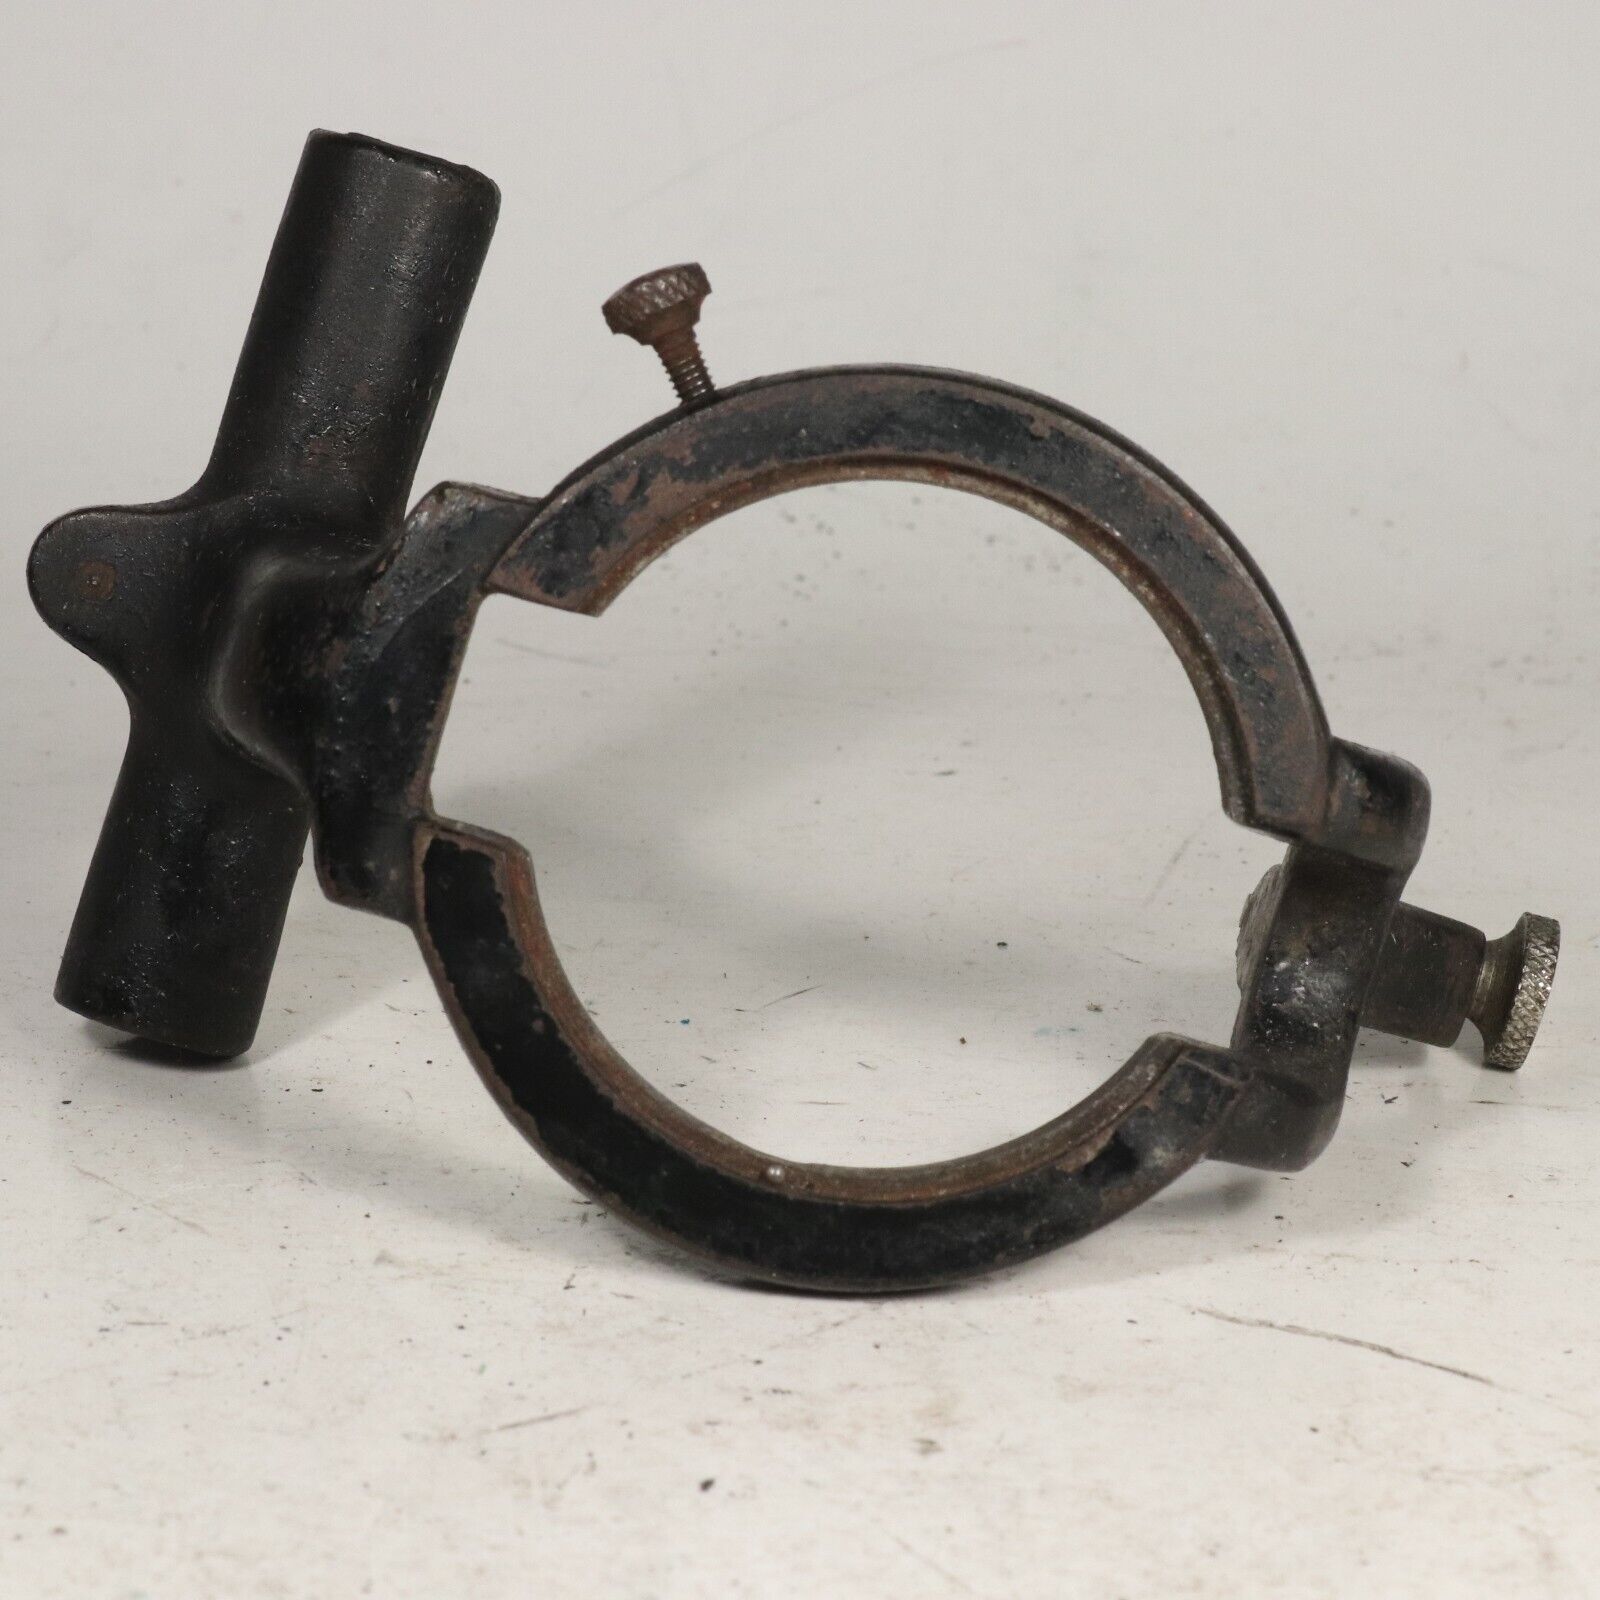 Edison Fireside Cylinder Phonograph Part:  Carriage for Diamond B Reproducer